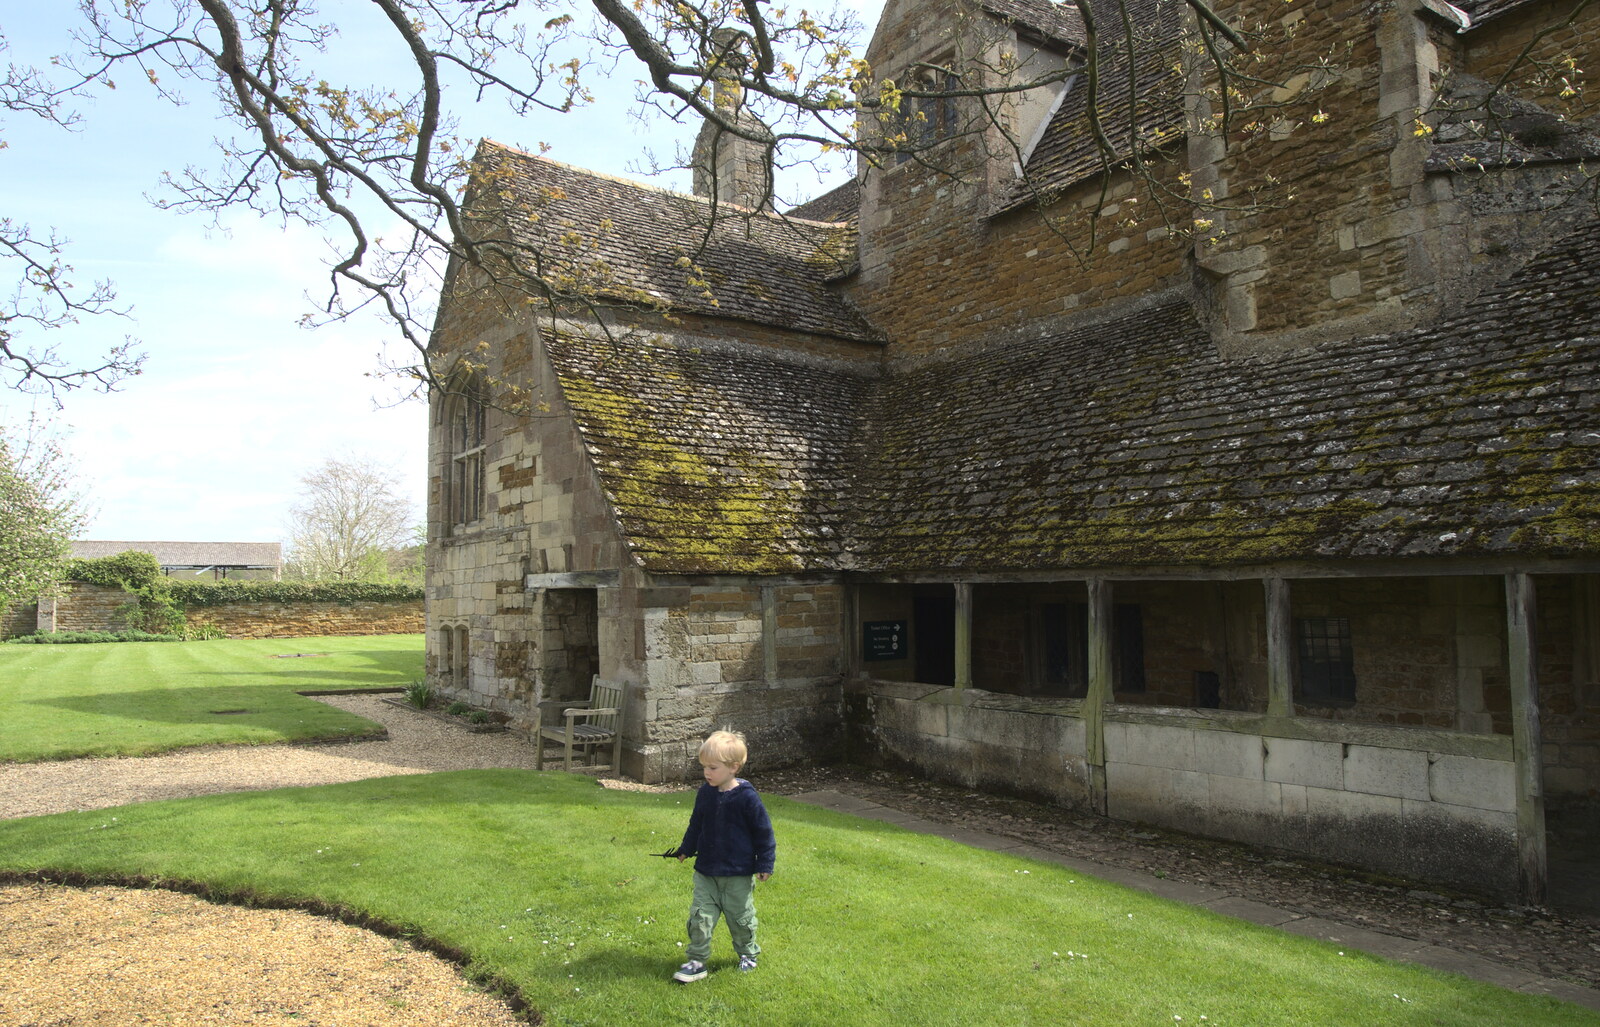 Harry on the lawn outside the Bede House from The BSCC Weekend Away, Lyddington, Rutland - 9th May 2015